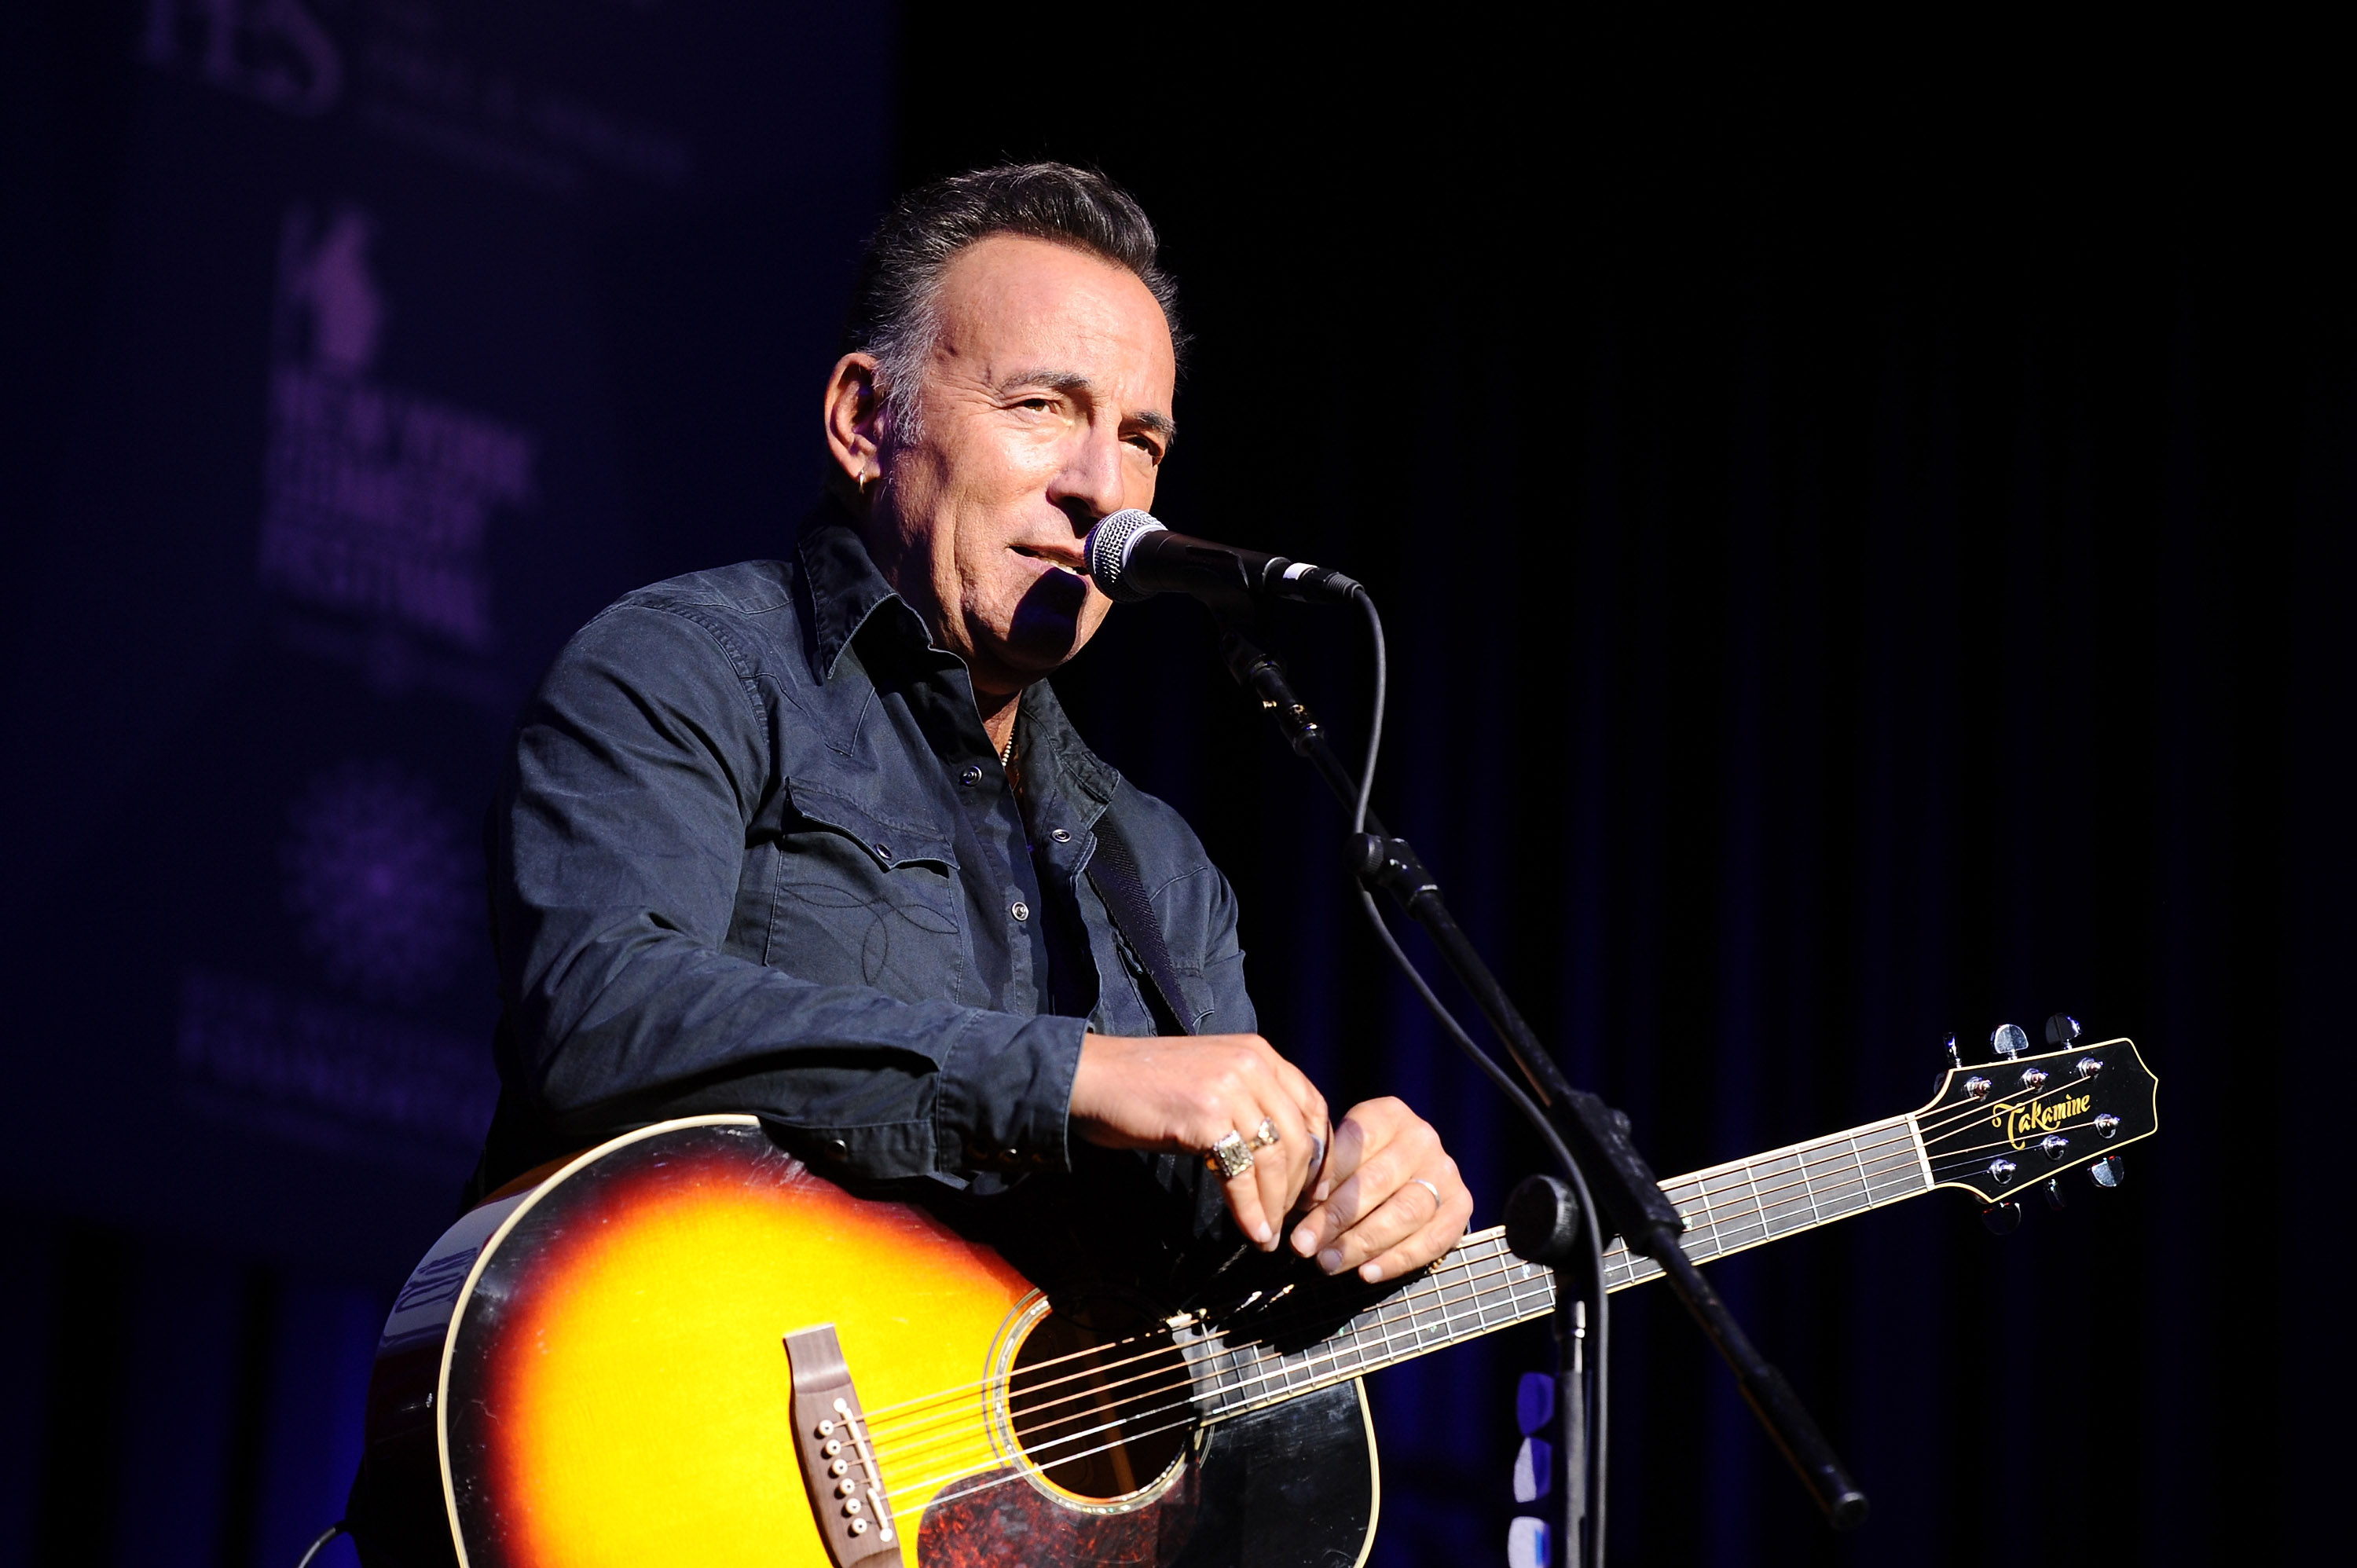 Bruce Springsteen fans were freezed out on Ticketmaster this morning, but there are several solutions the site could implement so that doesn't happen again. (Photo: Ilya S. Savenok/Getty Images)